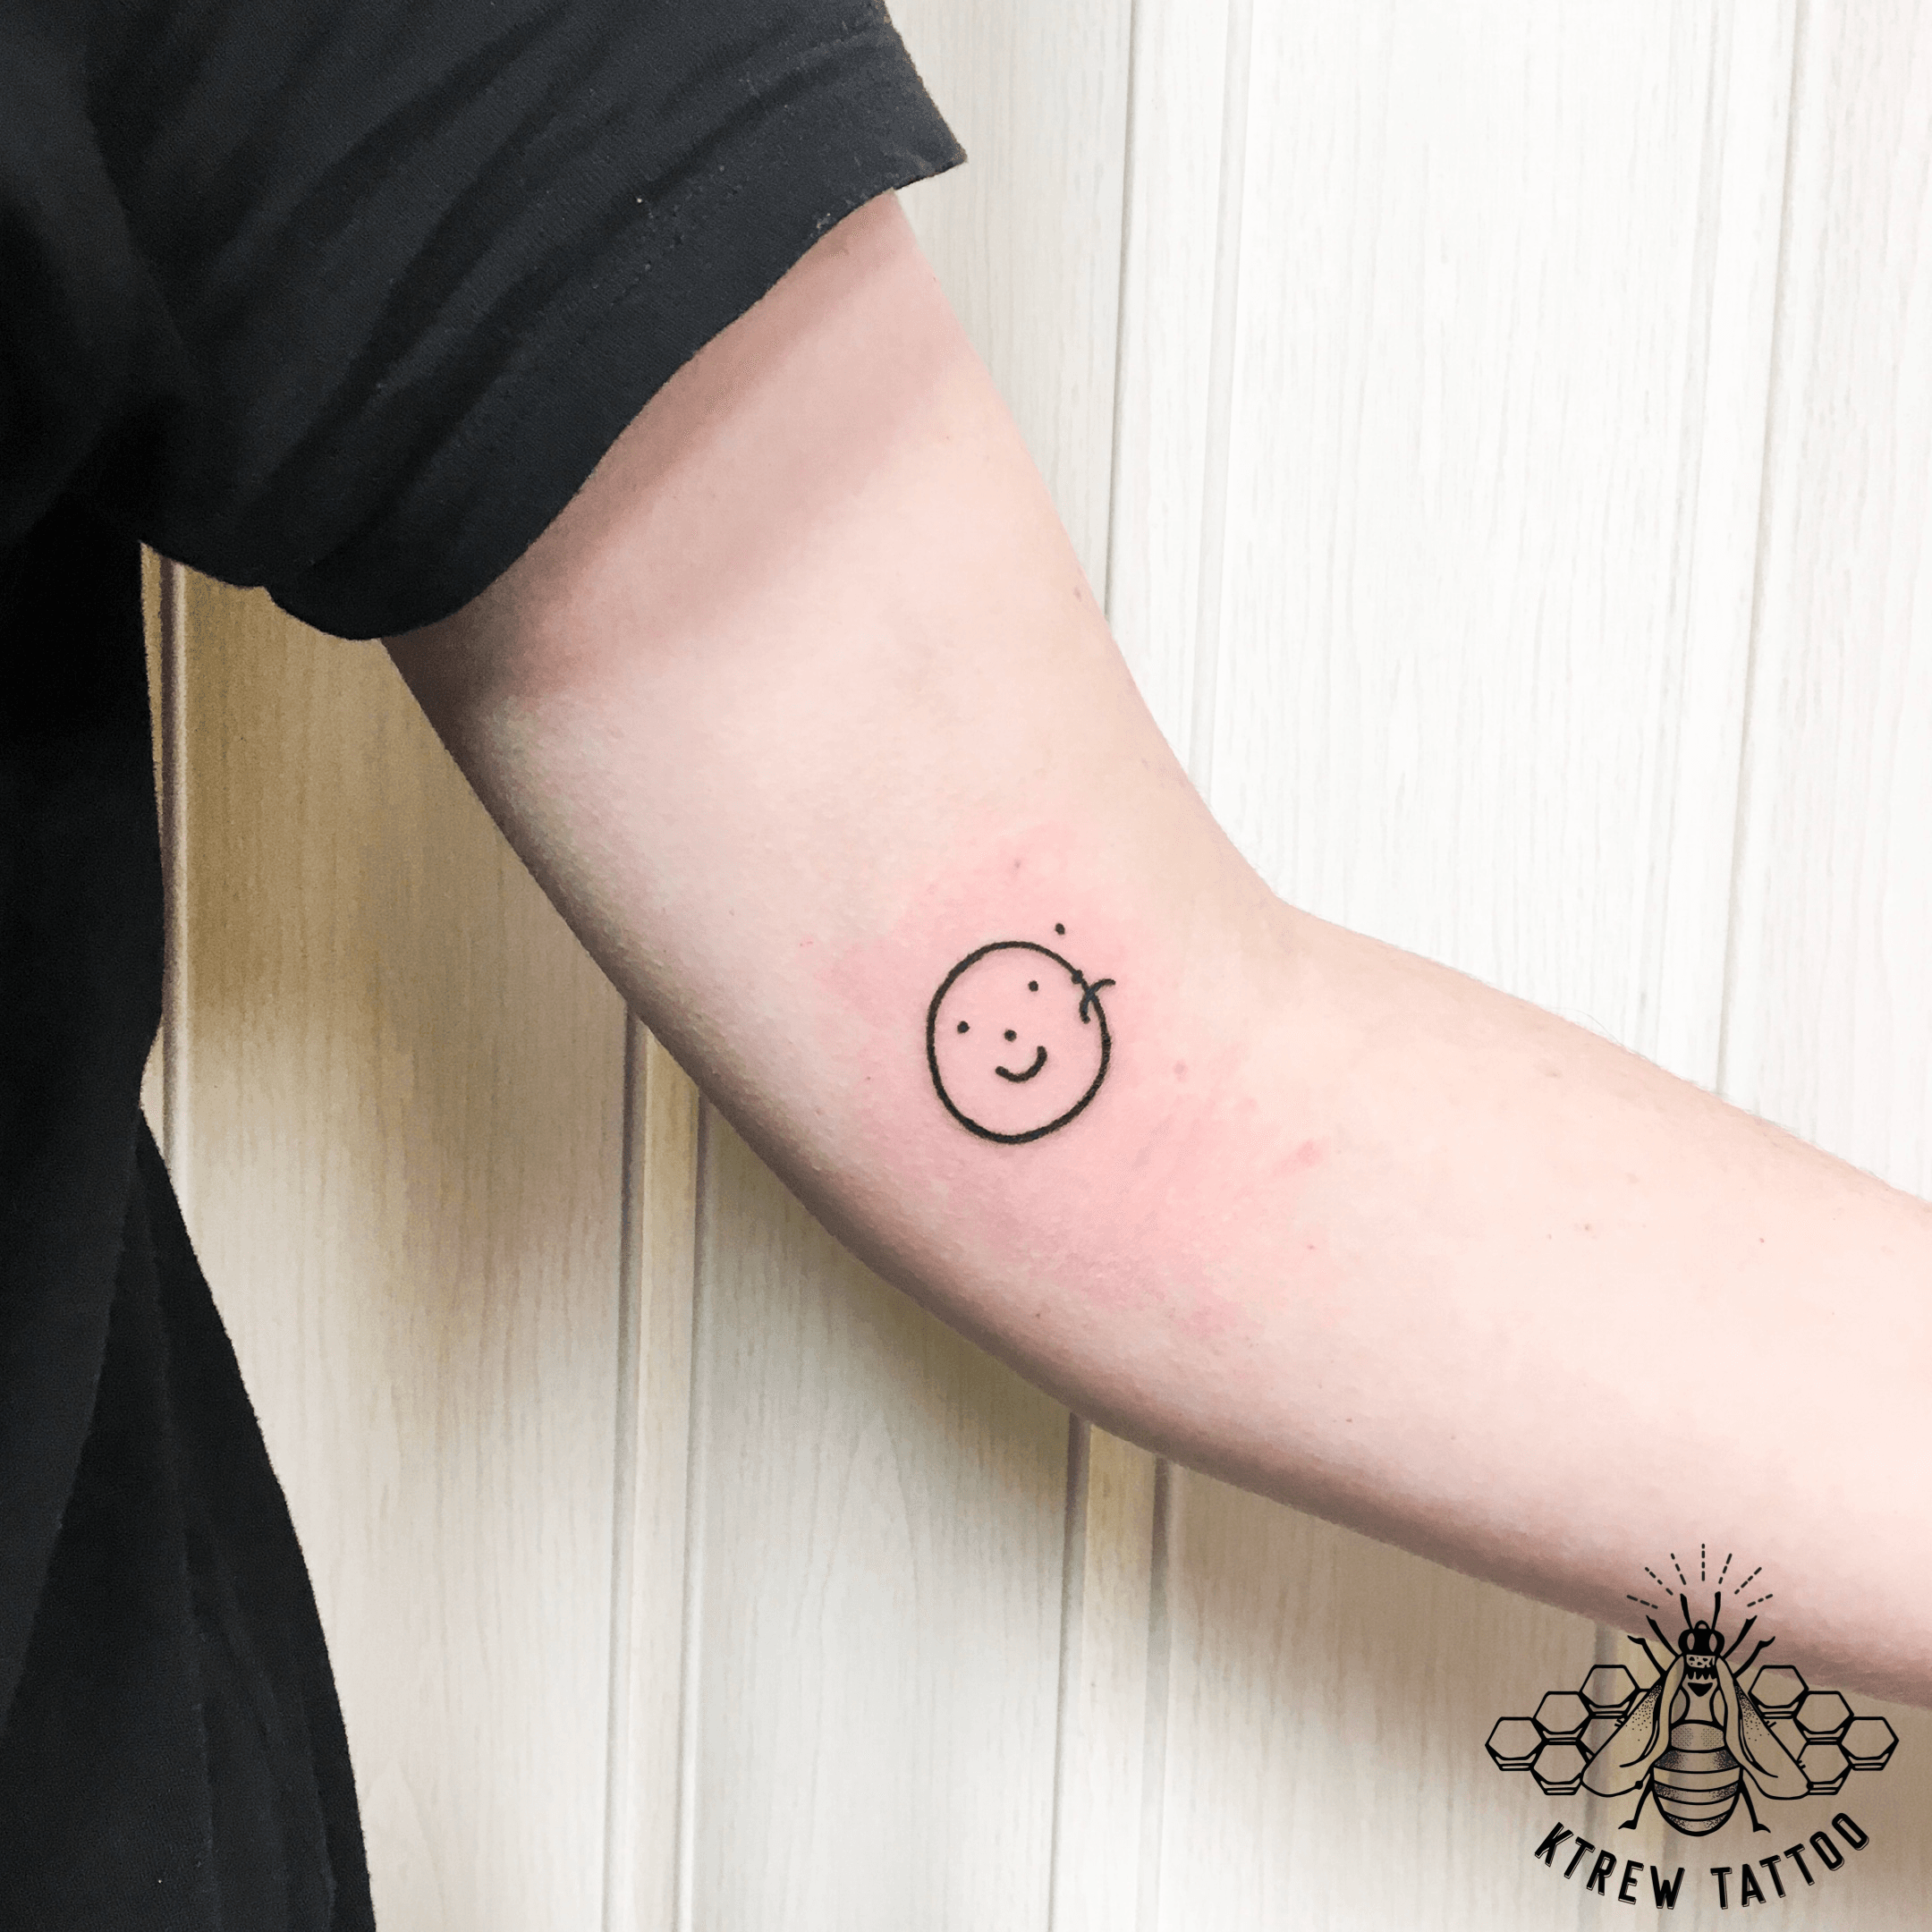 smiley face tattoos can be a symbol of happiness and joy They can also  serve as a reminder about who you are and what you valuenamely  Instagram